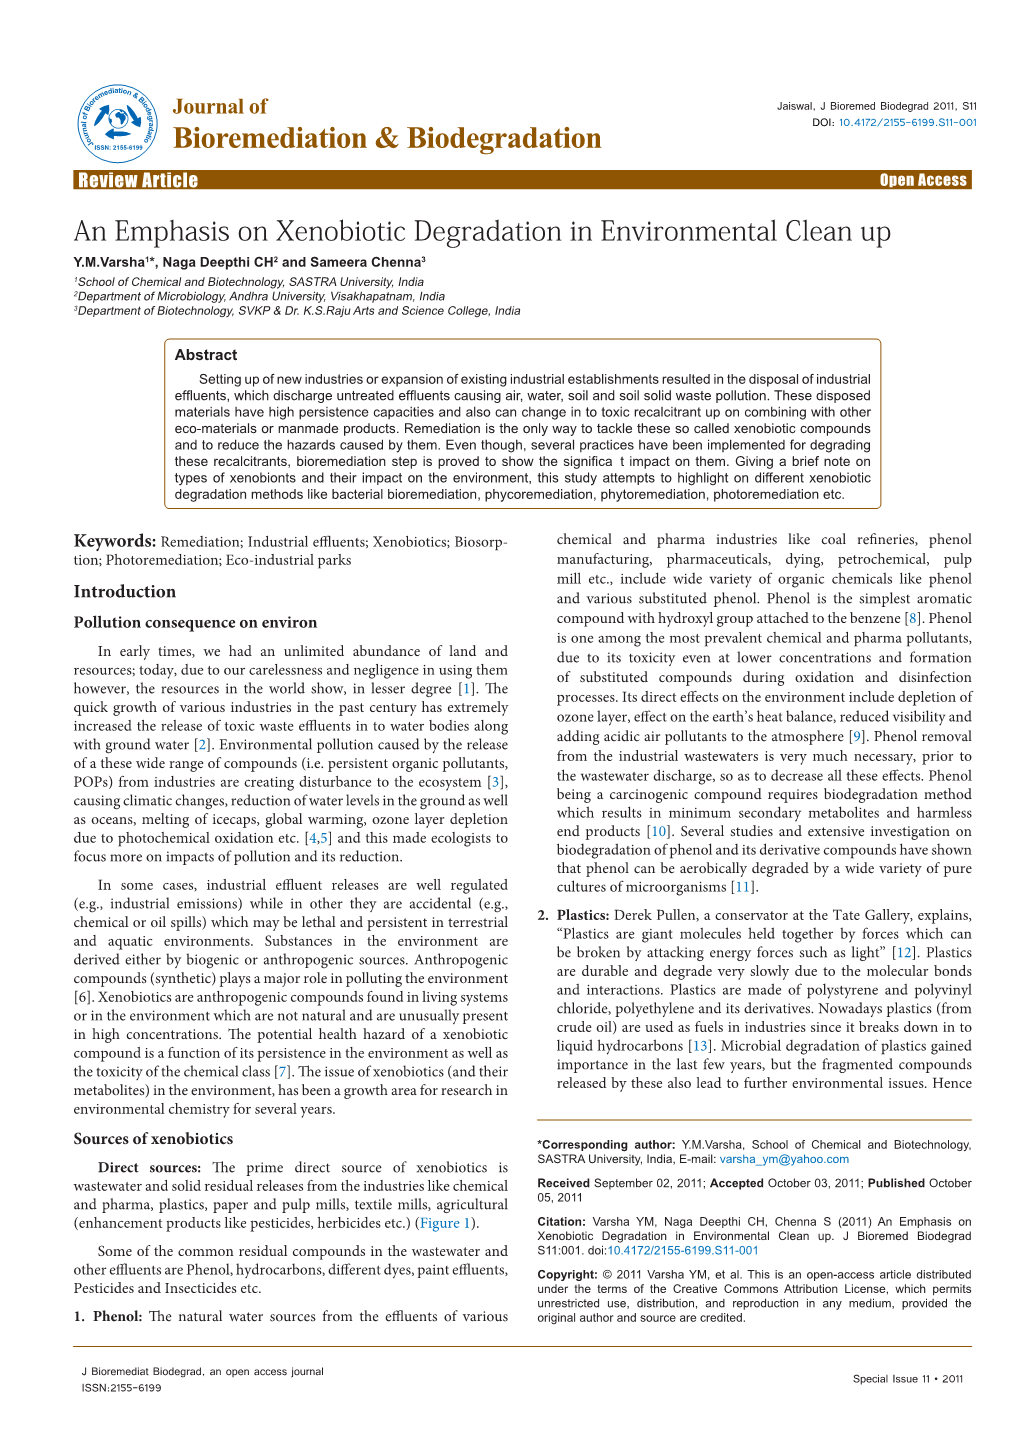 An Emphasis on Xenobiotic Degradation in Environmental Clean Up